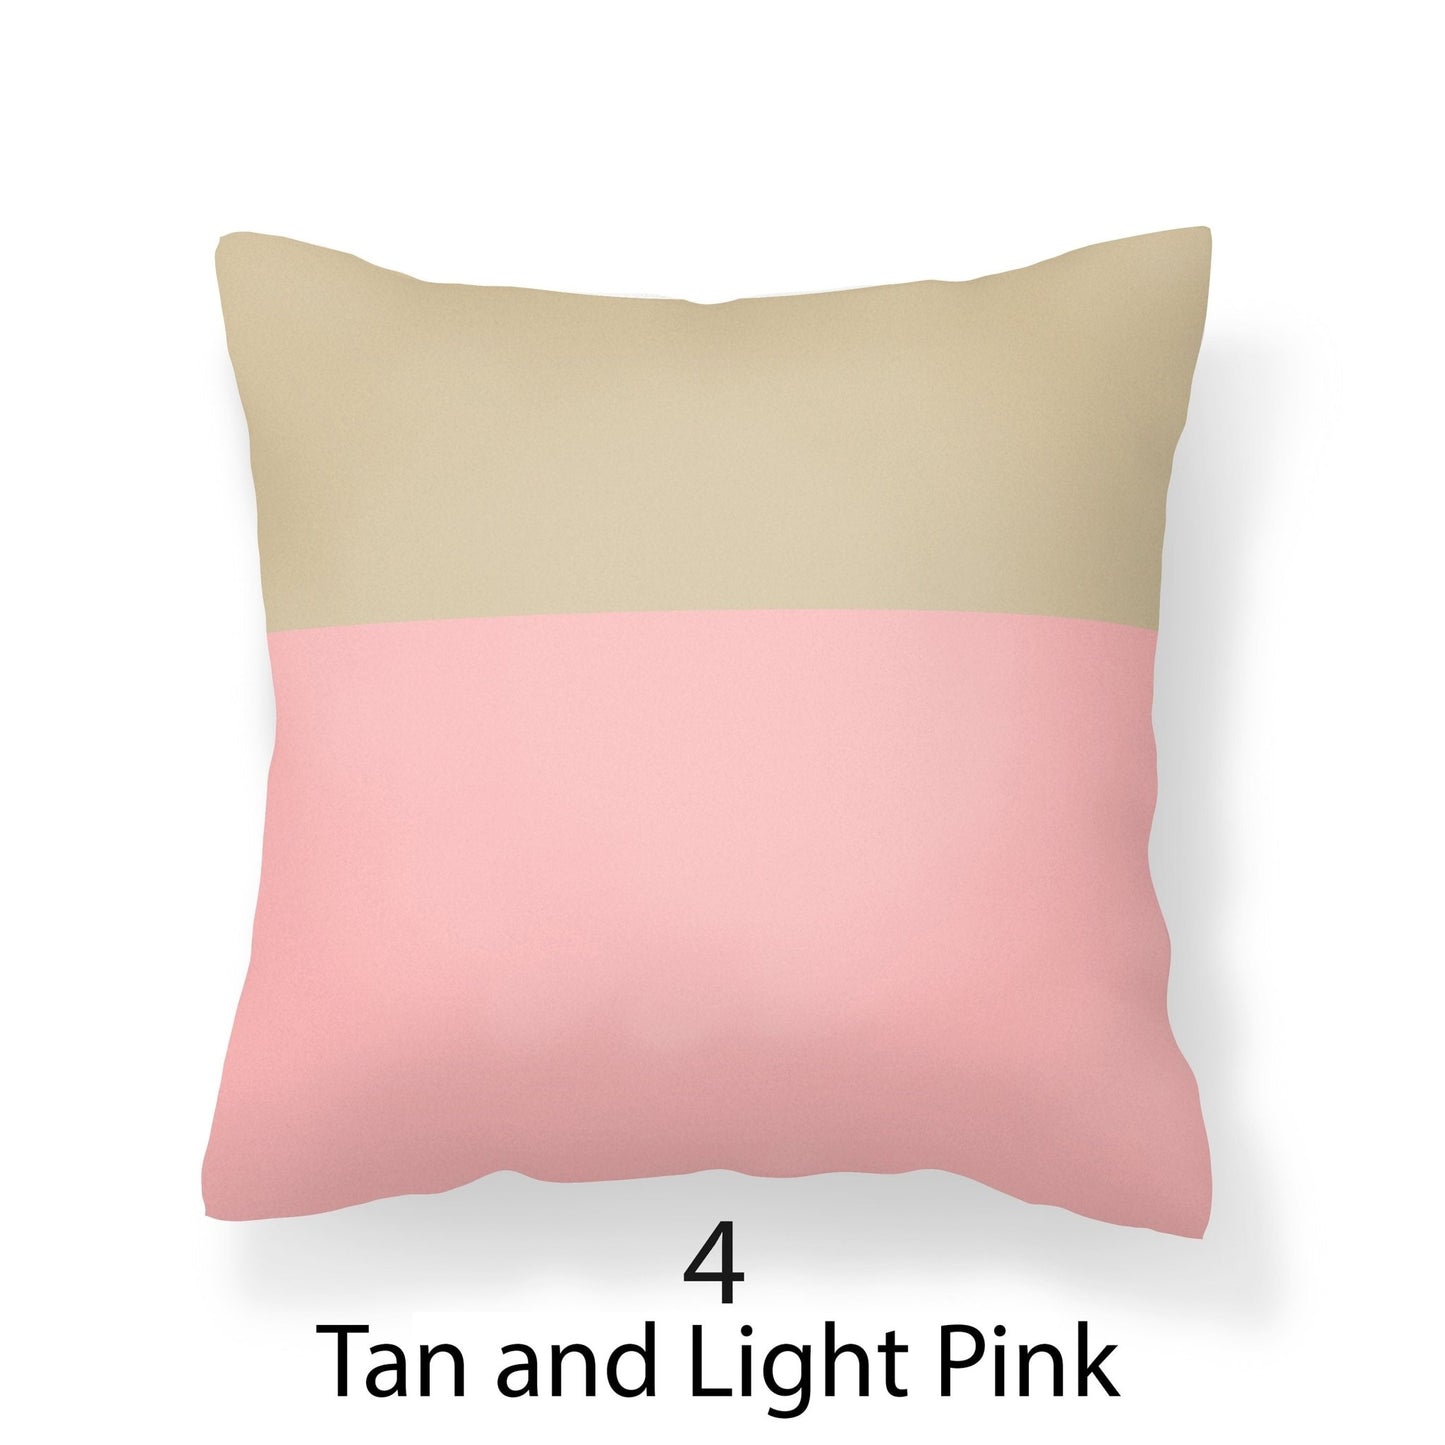 Blush Pink Pillow Cases - Mix and Match